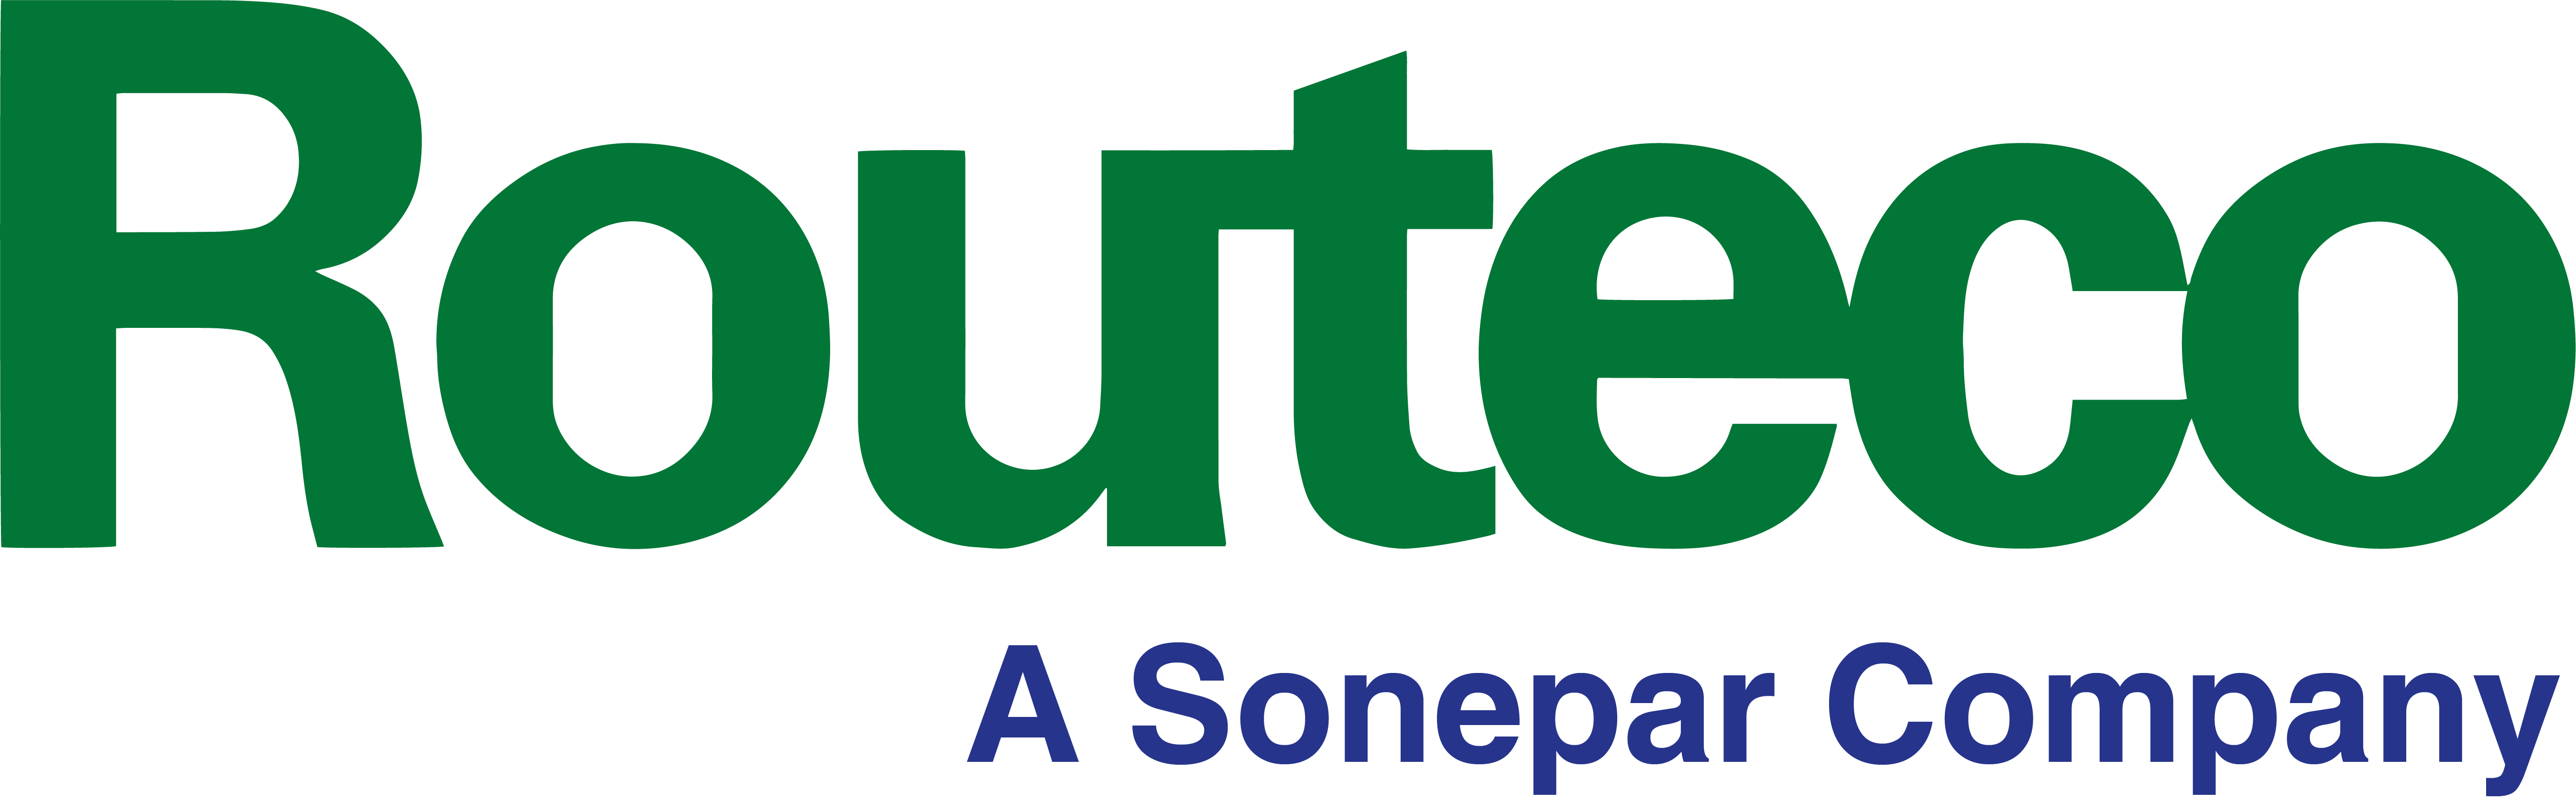 Routeco announce a new acquisition_img